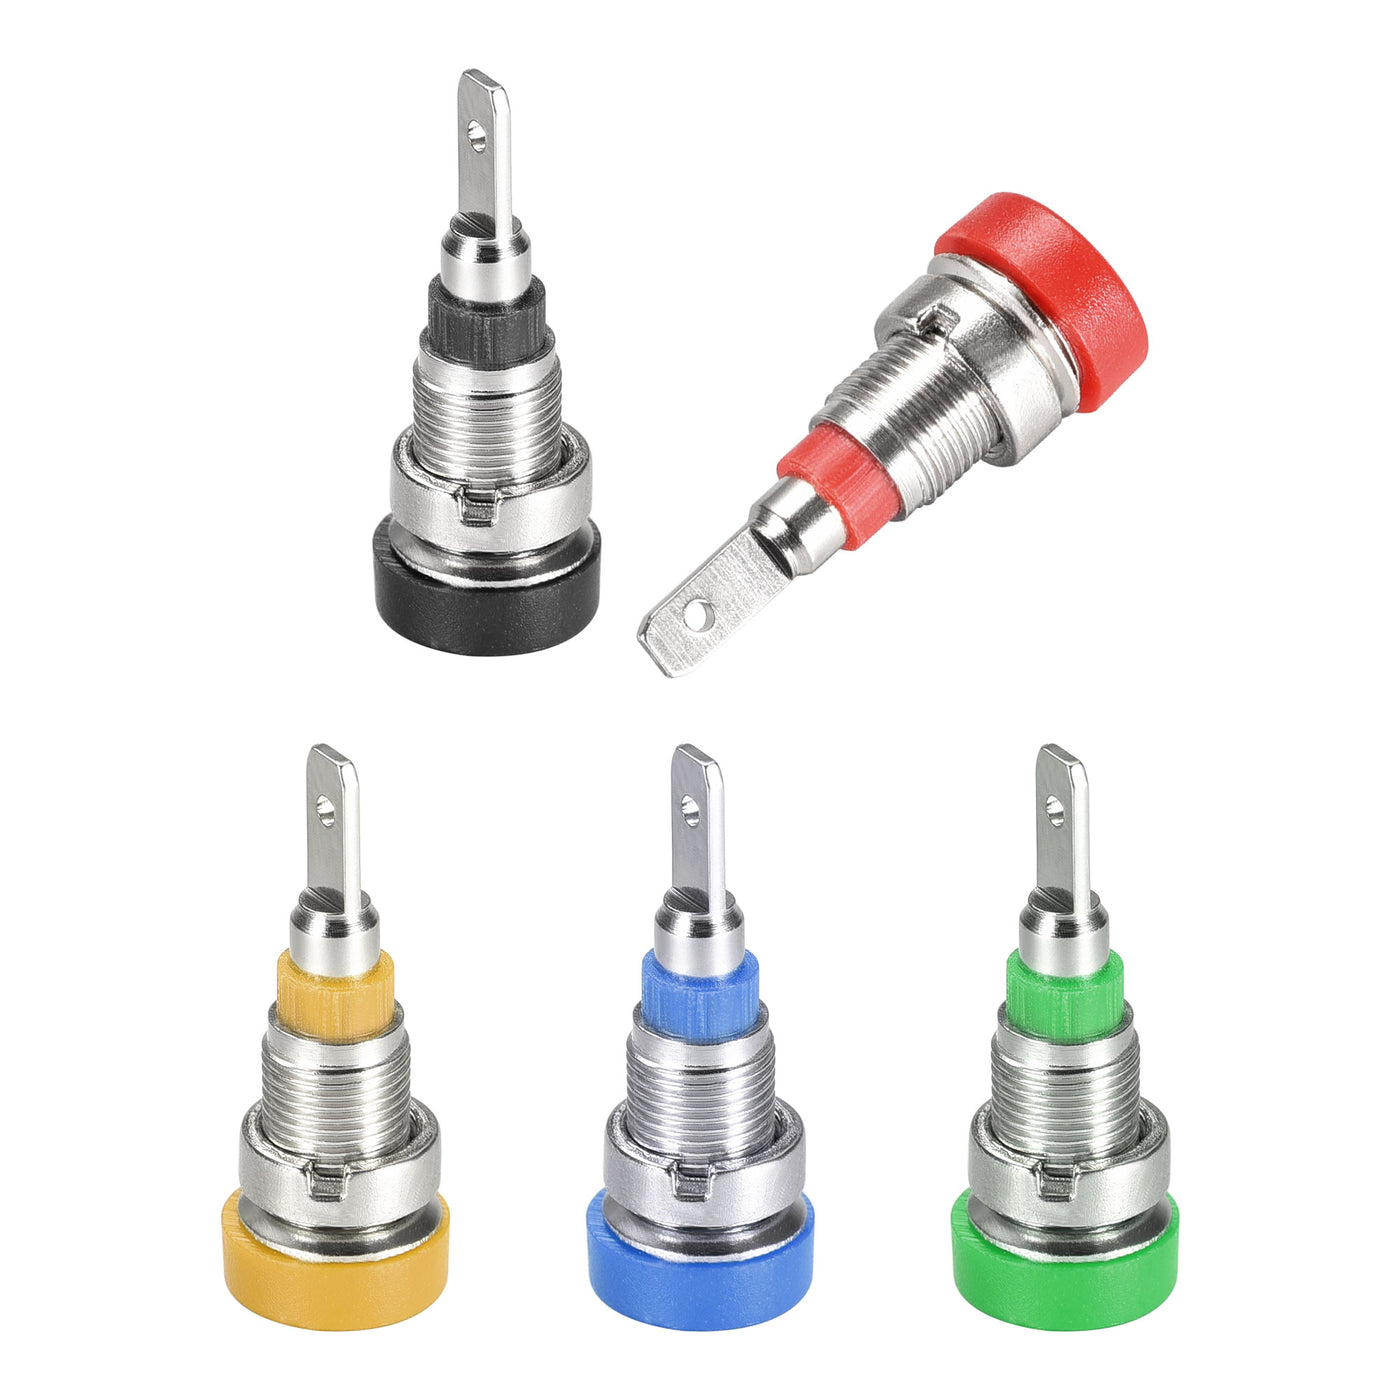 uxcell Uxcell 5pcs 2mm Banana Jack Binding Post Female Socket Plug Terminal Connector 24A for Loudspeaker Amplifier Red Black Yellow Blue Green